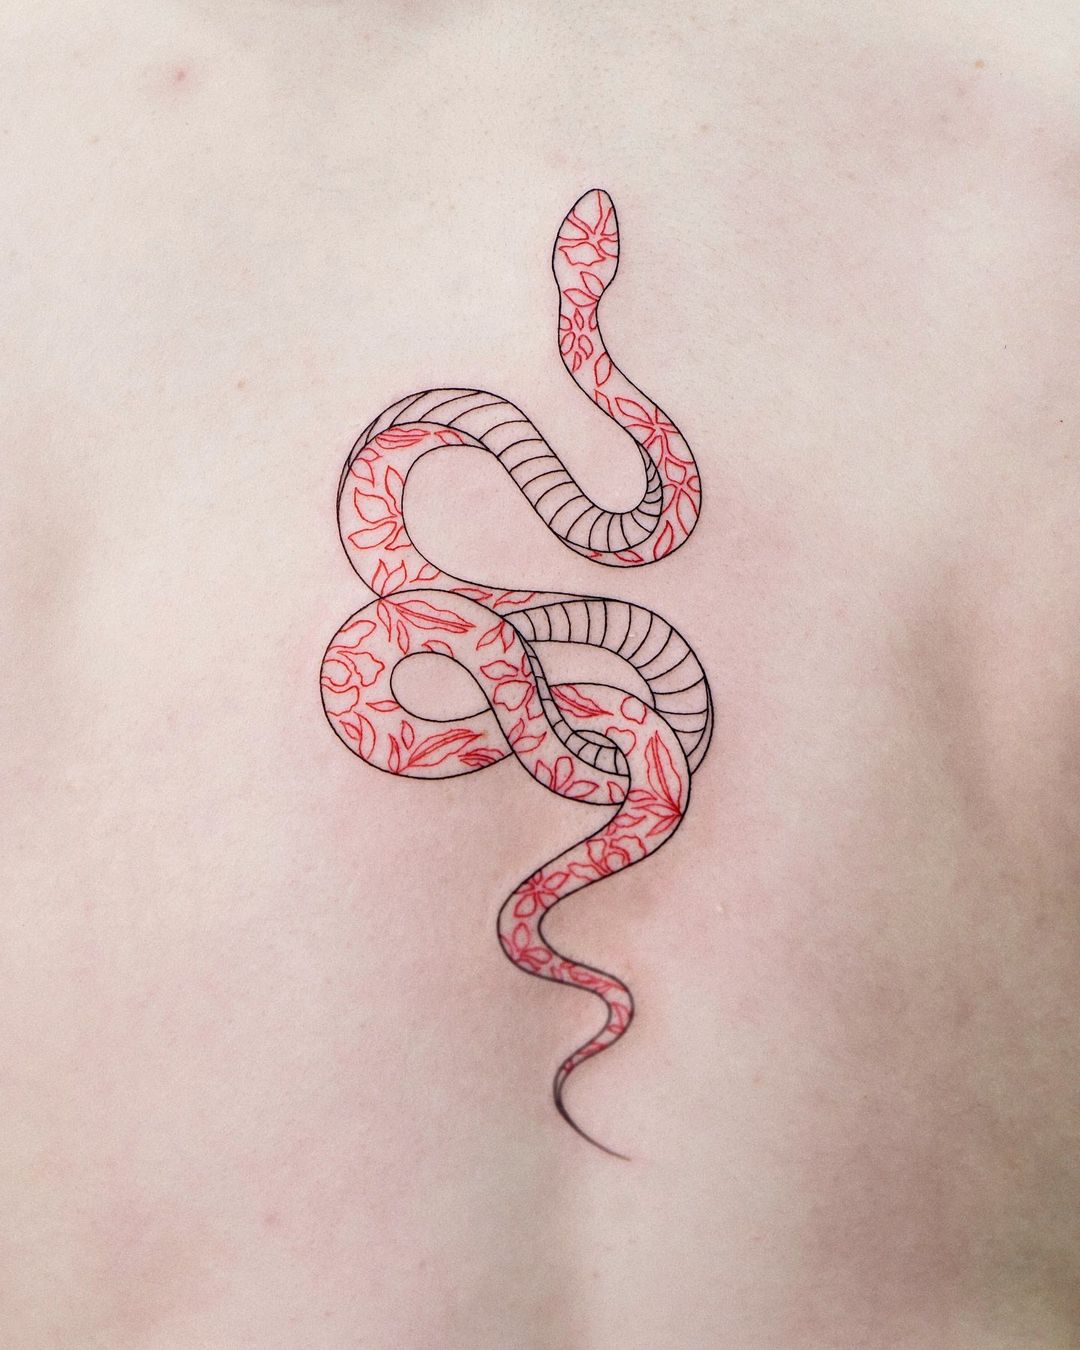 11 Snake Flower Tattoo Ideas That Will Blow Your Mind  alexie